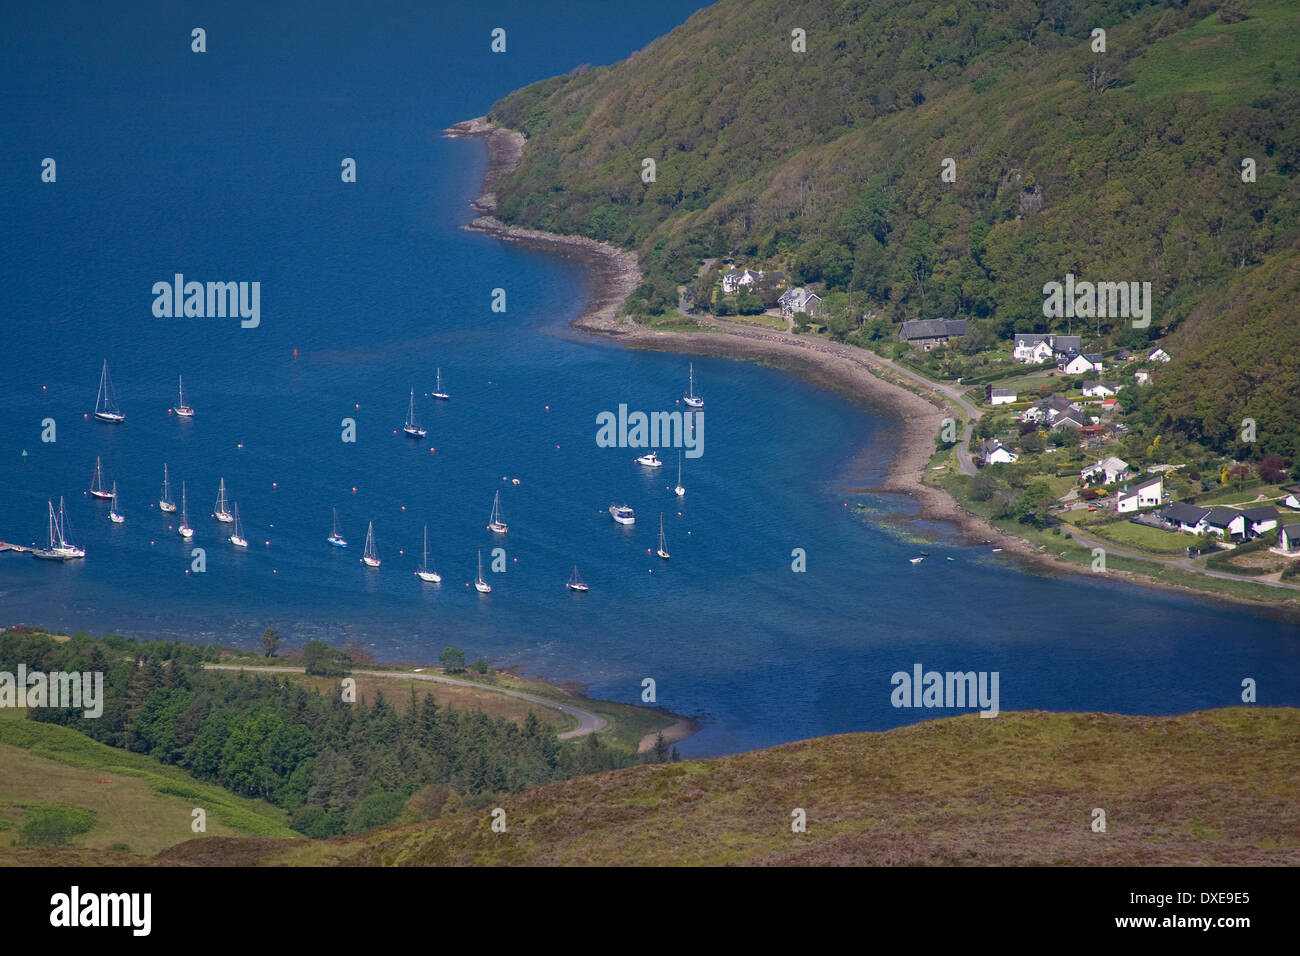 Telephoto view of the anchorage on Loch Melfort, Kilmelford, Argyll Stock Photo